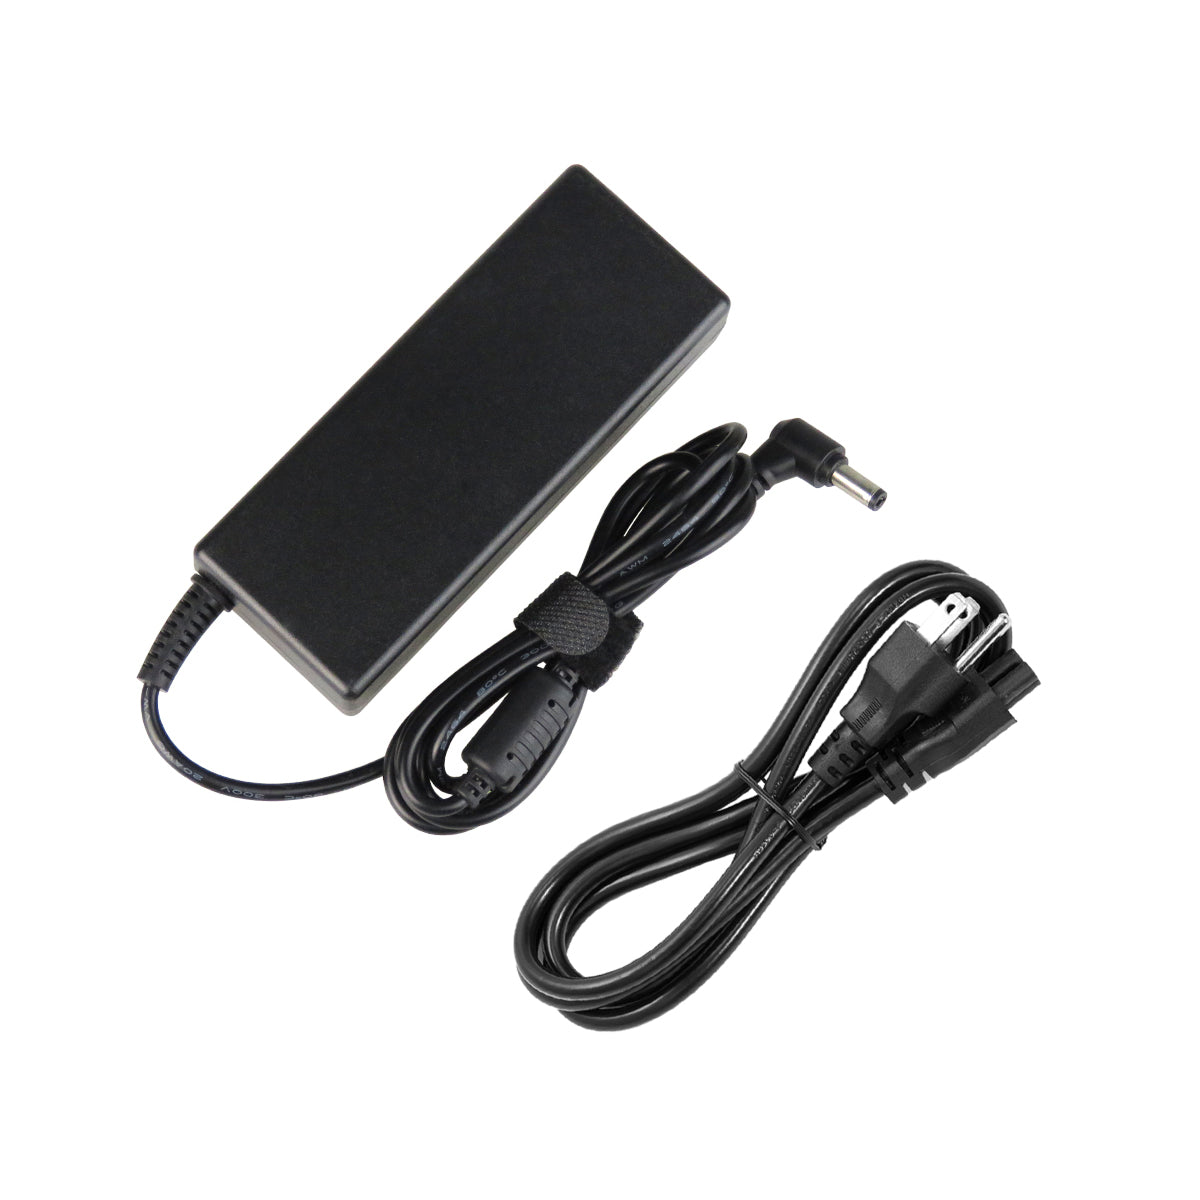 Power Adapter for ASUS VG279QM Monitor